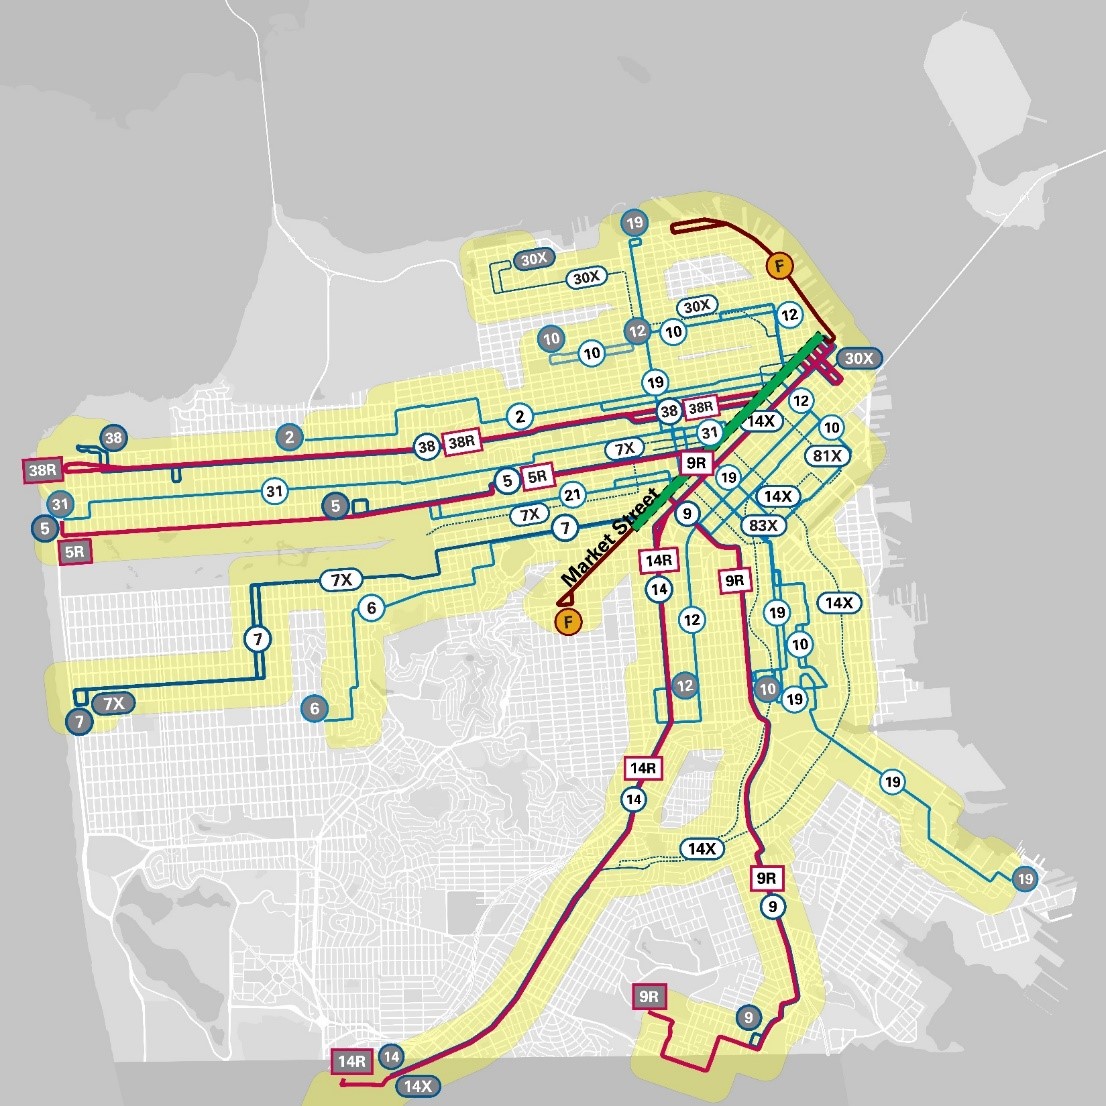 Routes using Market include: 38, 31, 5, 2, 6, 7, 14, 9, 19, 10, 12, 83x, 81x, 10, 30, F Streetcar